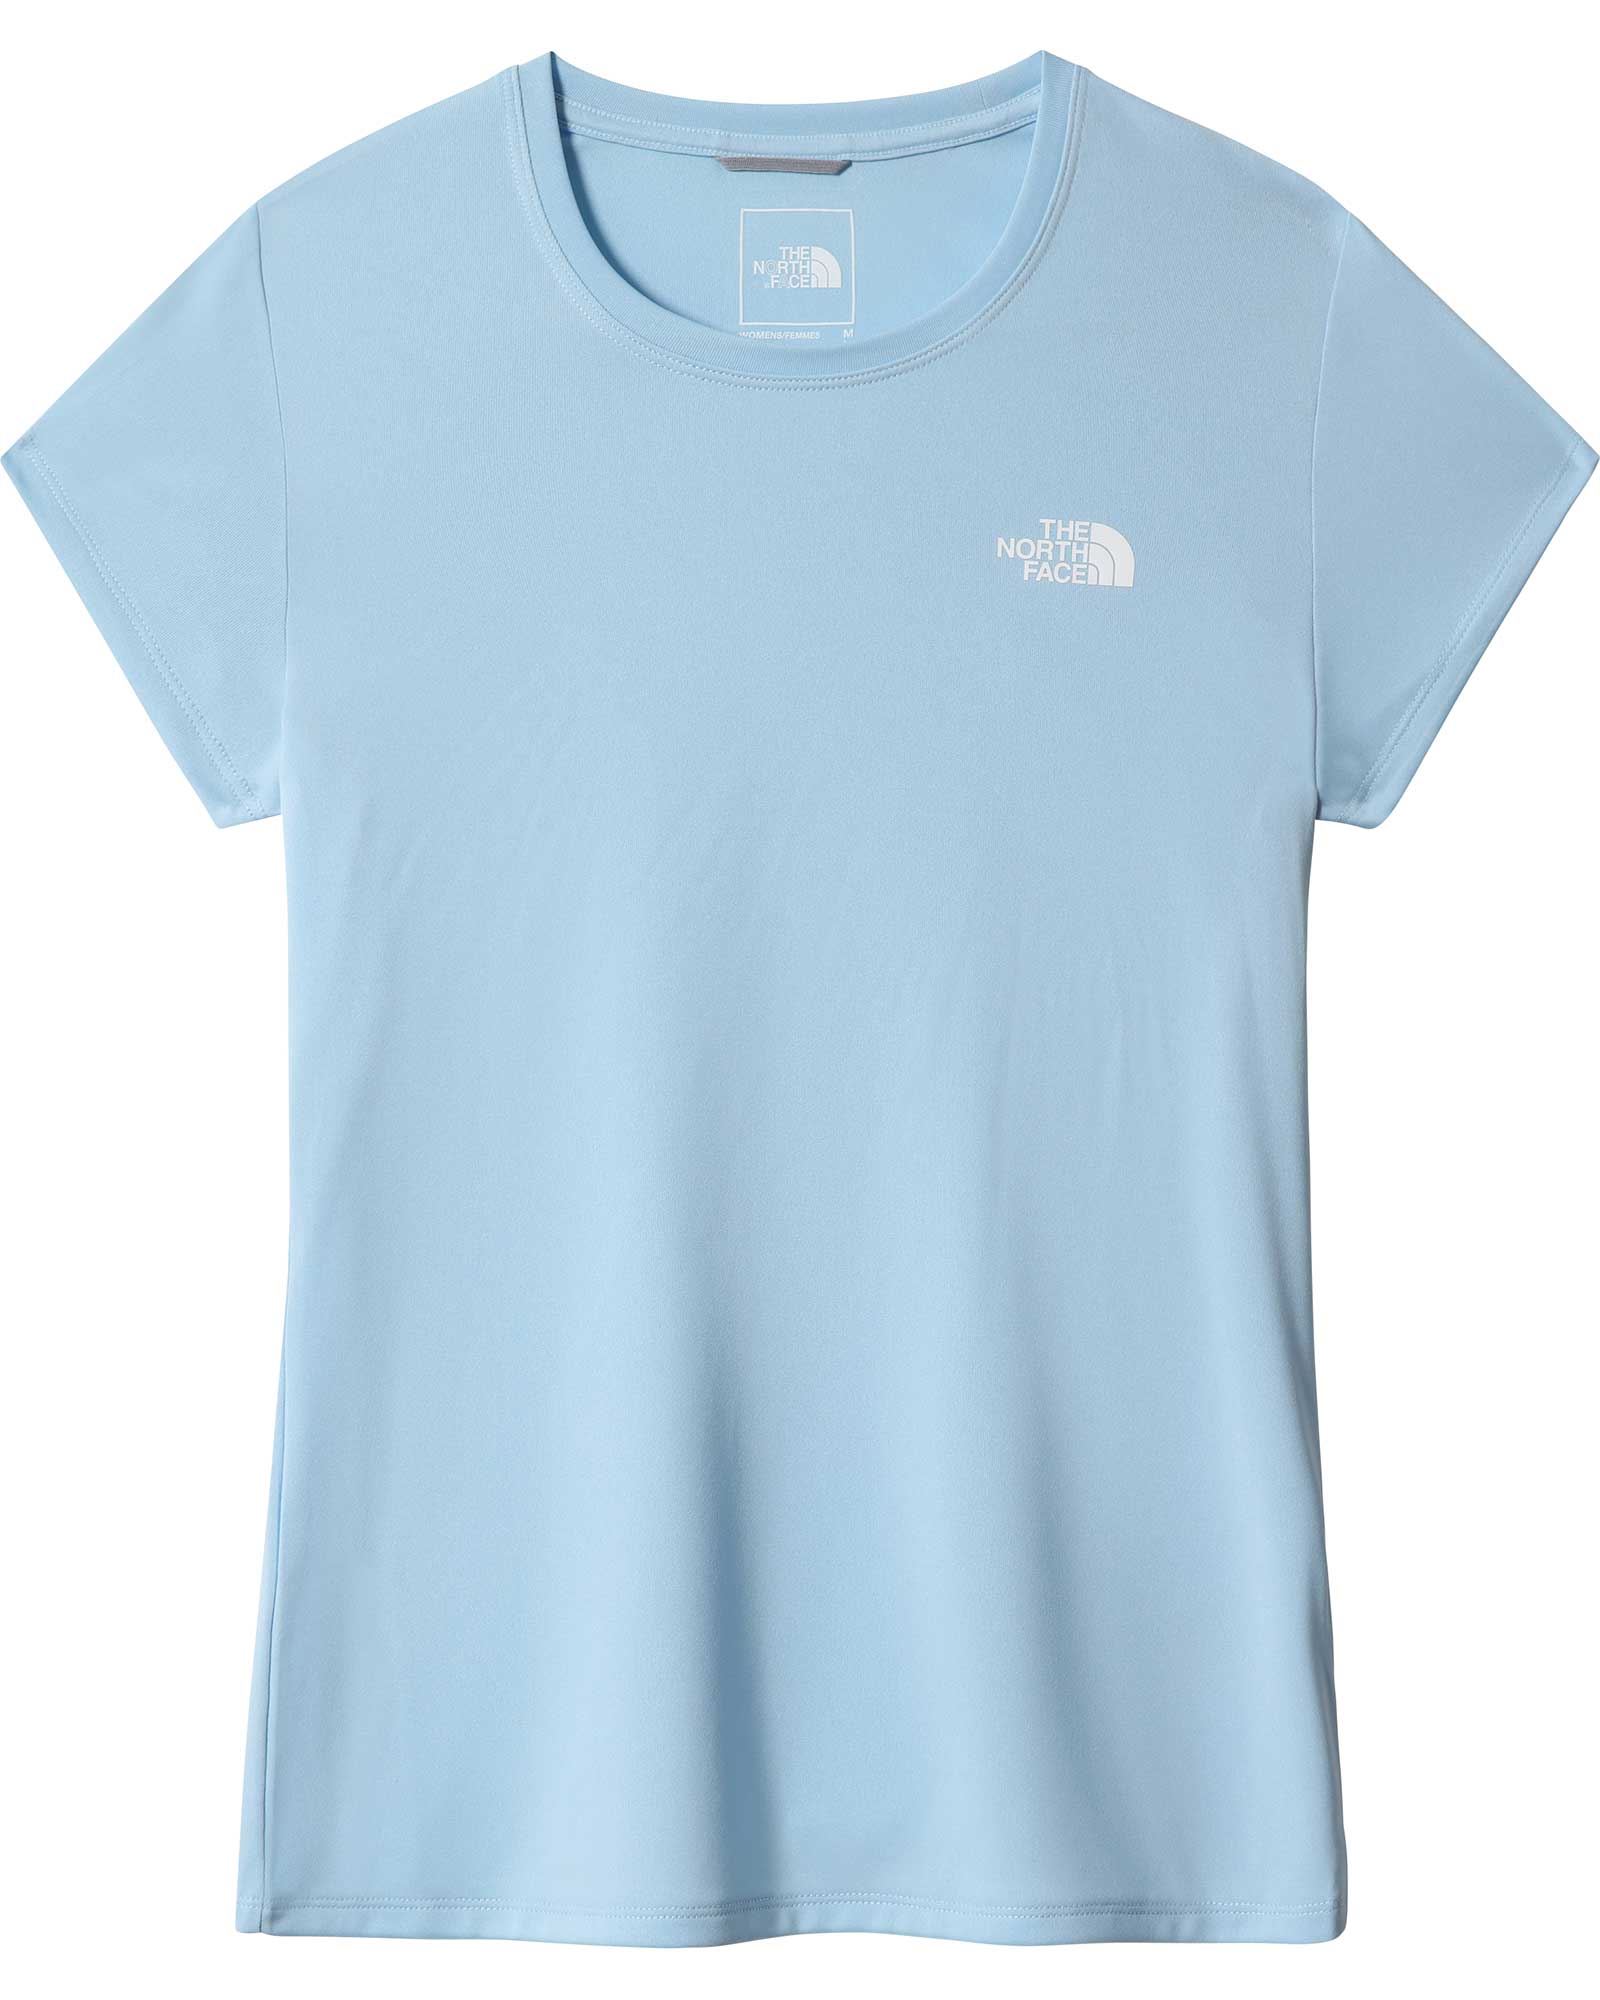 The North Face Reaxion Amp Women’s Crew T Shirt - Beta Blue XS